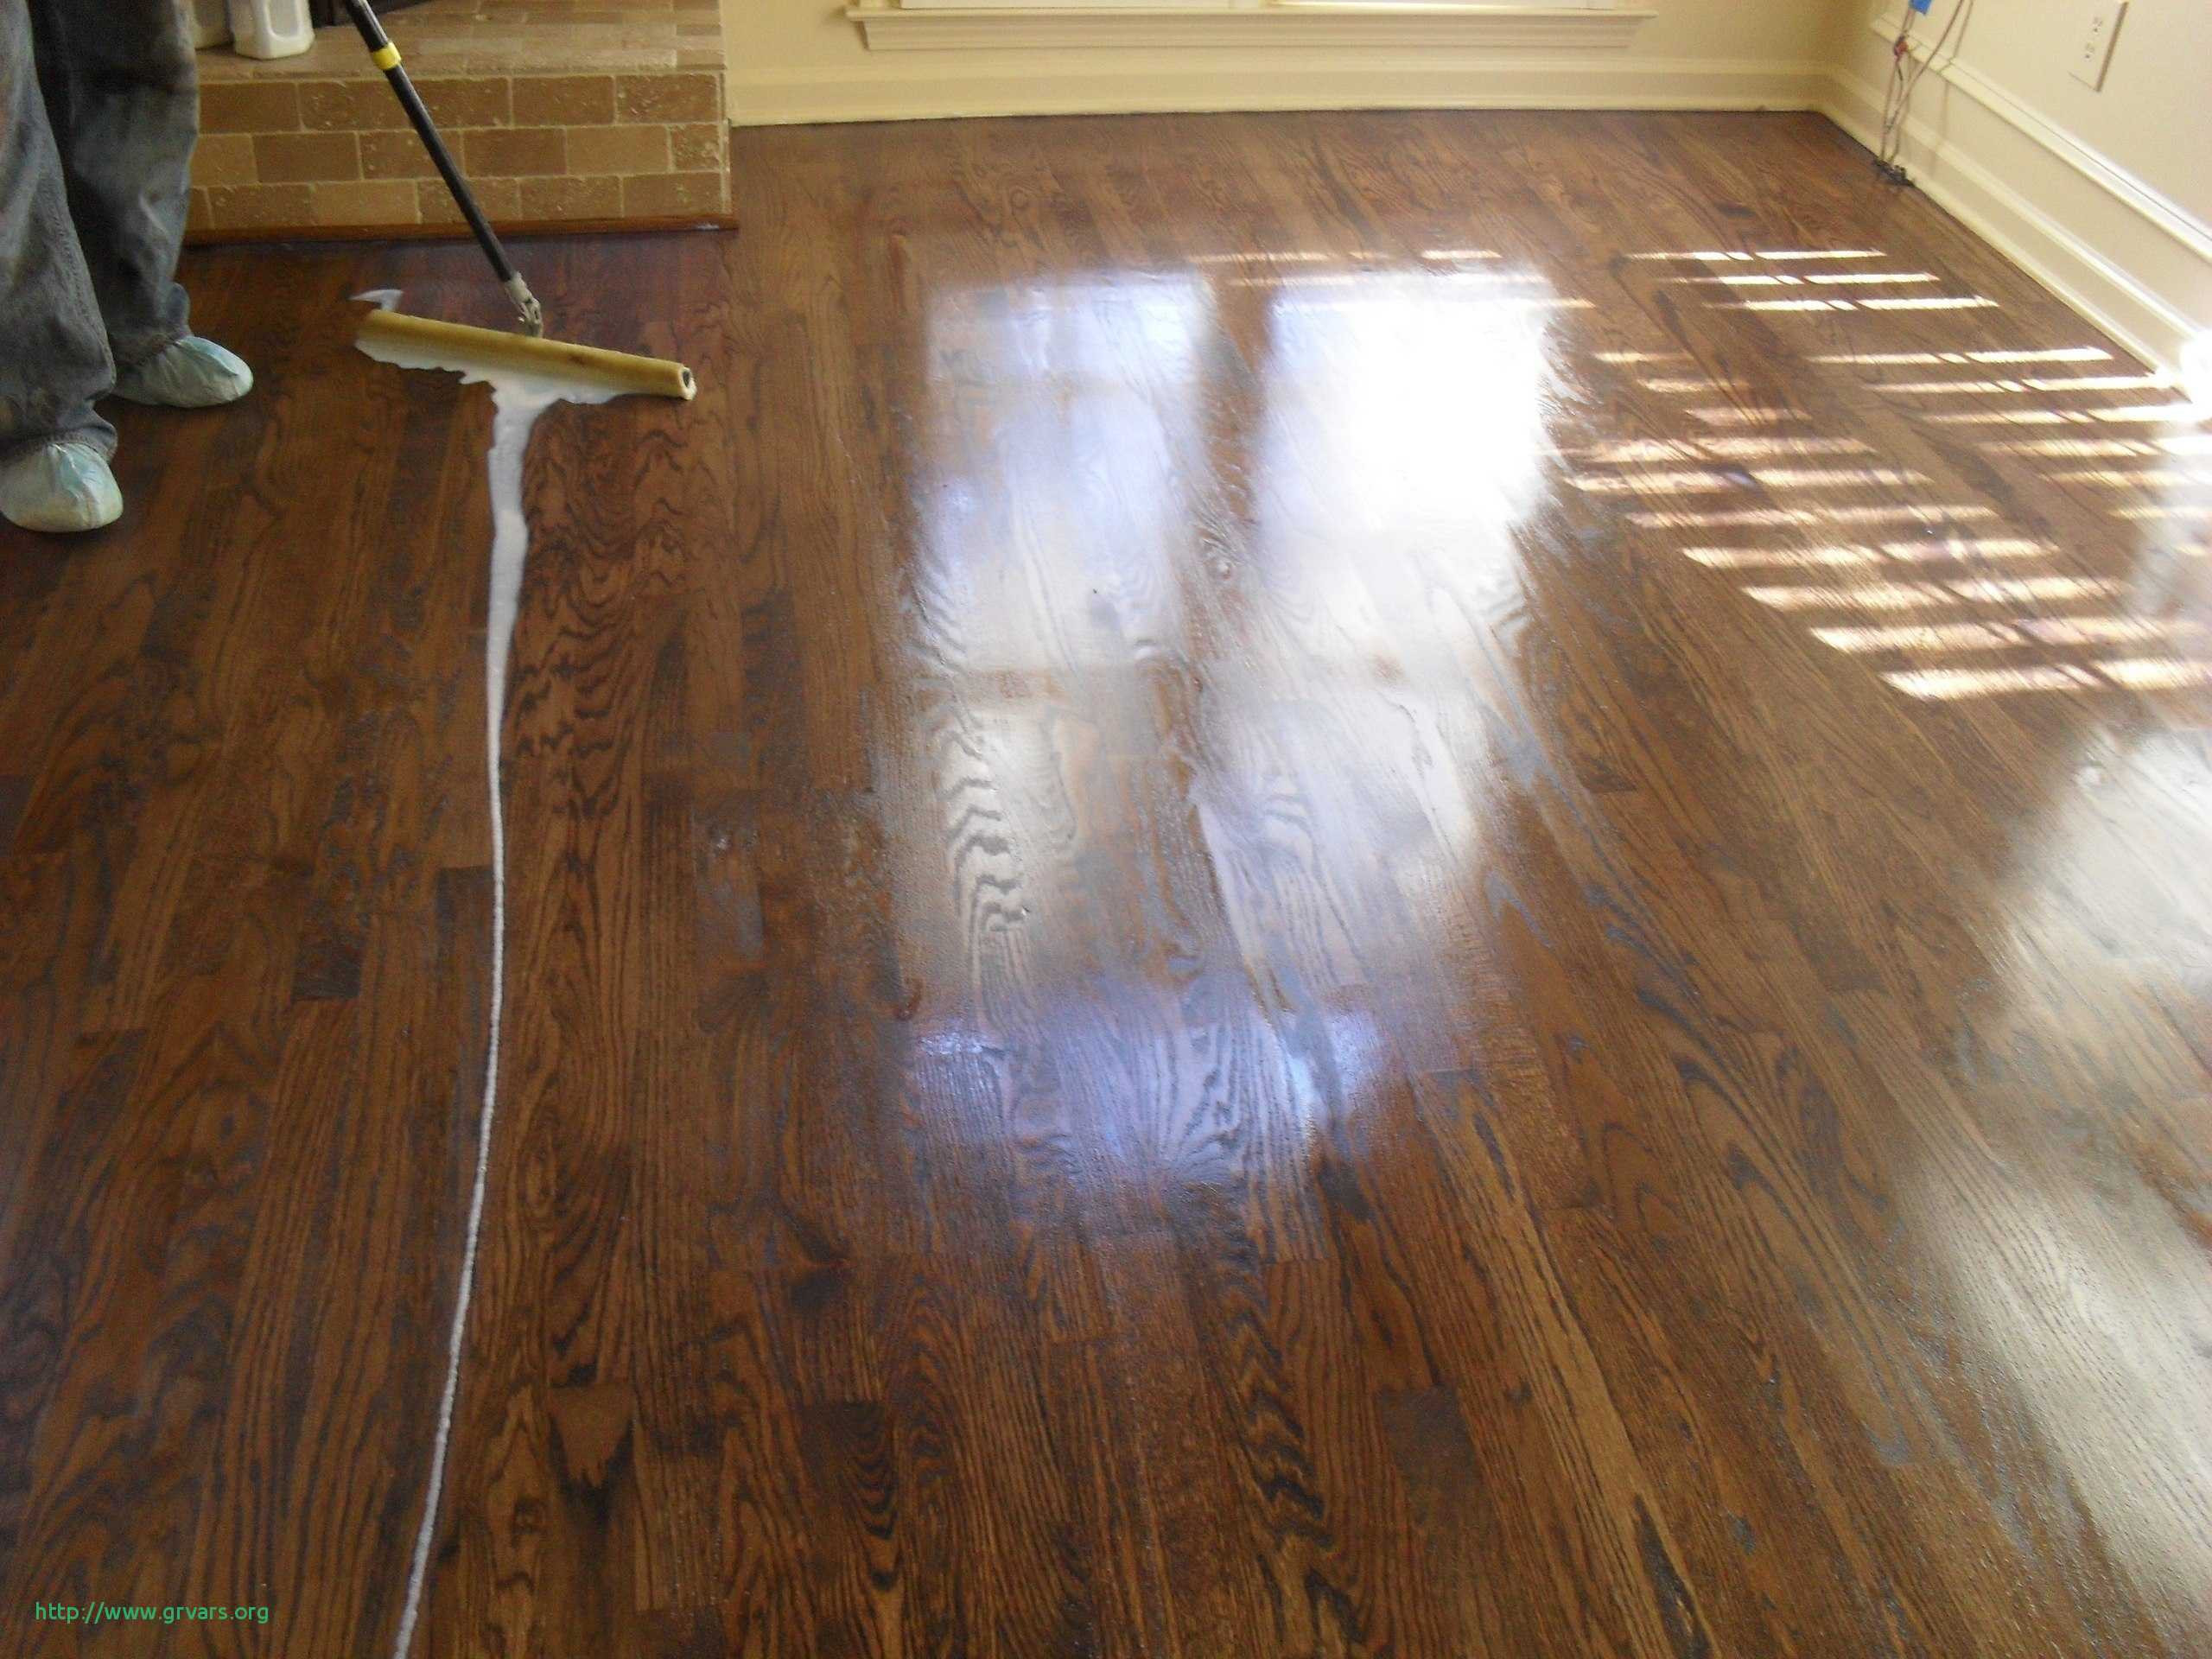 24 Recommended How Long Does It Take to Refinish Hardwood Floors 2024 free download how long does it take to refinish hardwood floors of image number 6563 from post restoring old hardwood floors will intended for nouveau hardwood floors yourself ideas restoring old will ins